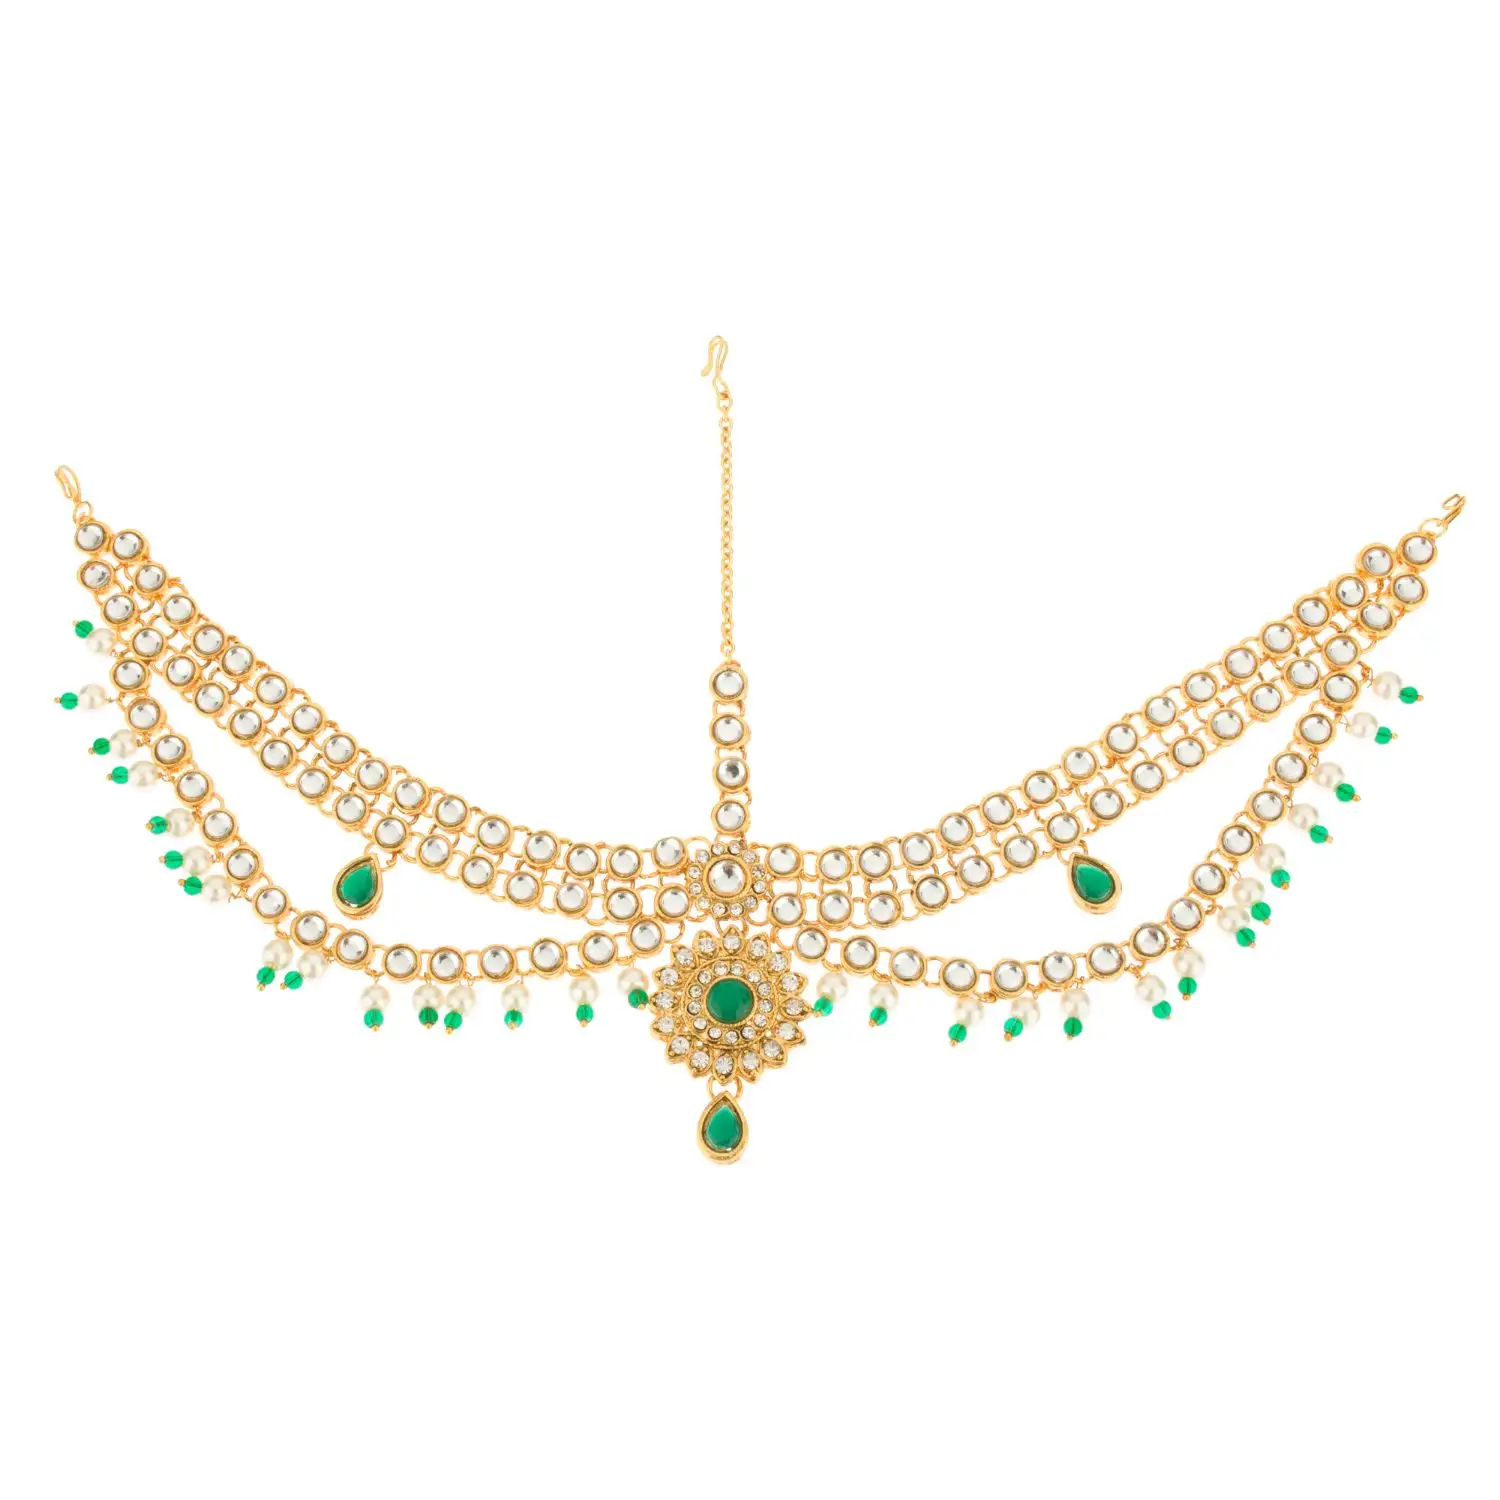 Traditional Indian White and Green Kundan American Diamond and Pearls Head Jewelry Design for Wedding and Bridal